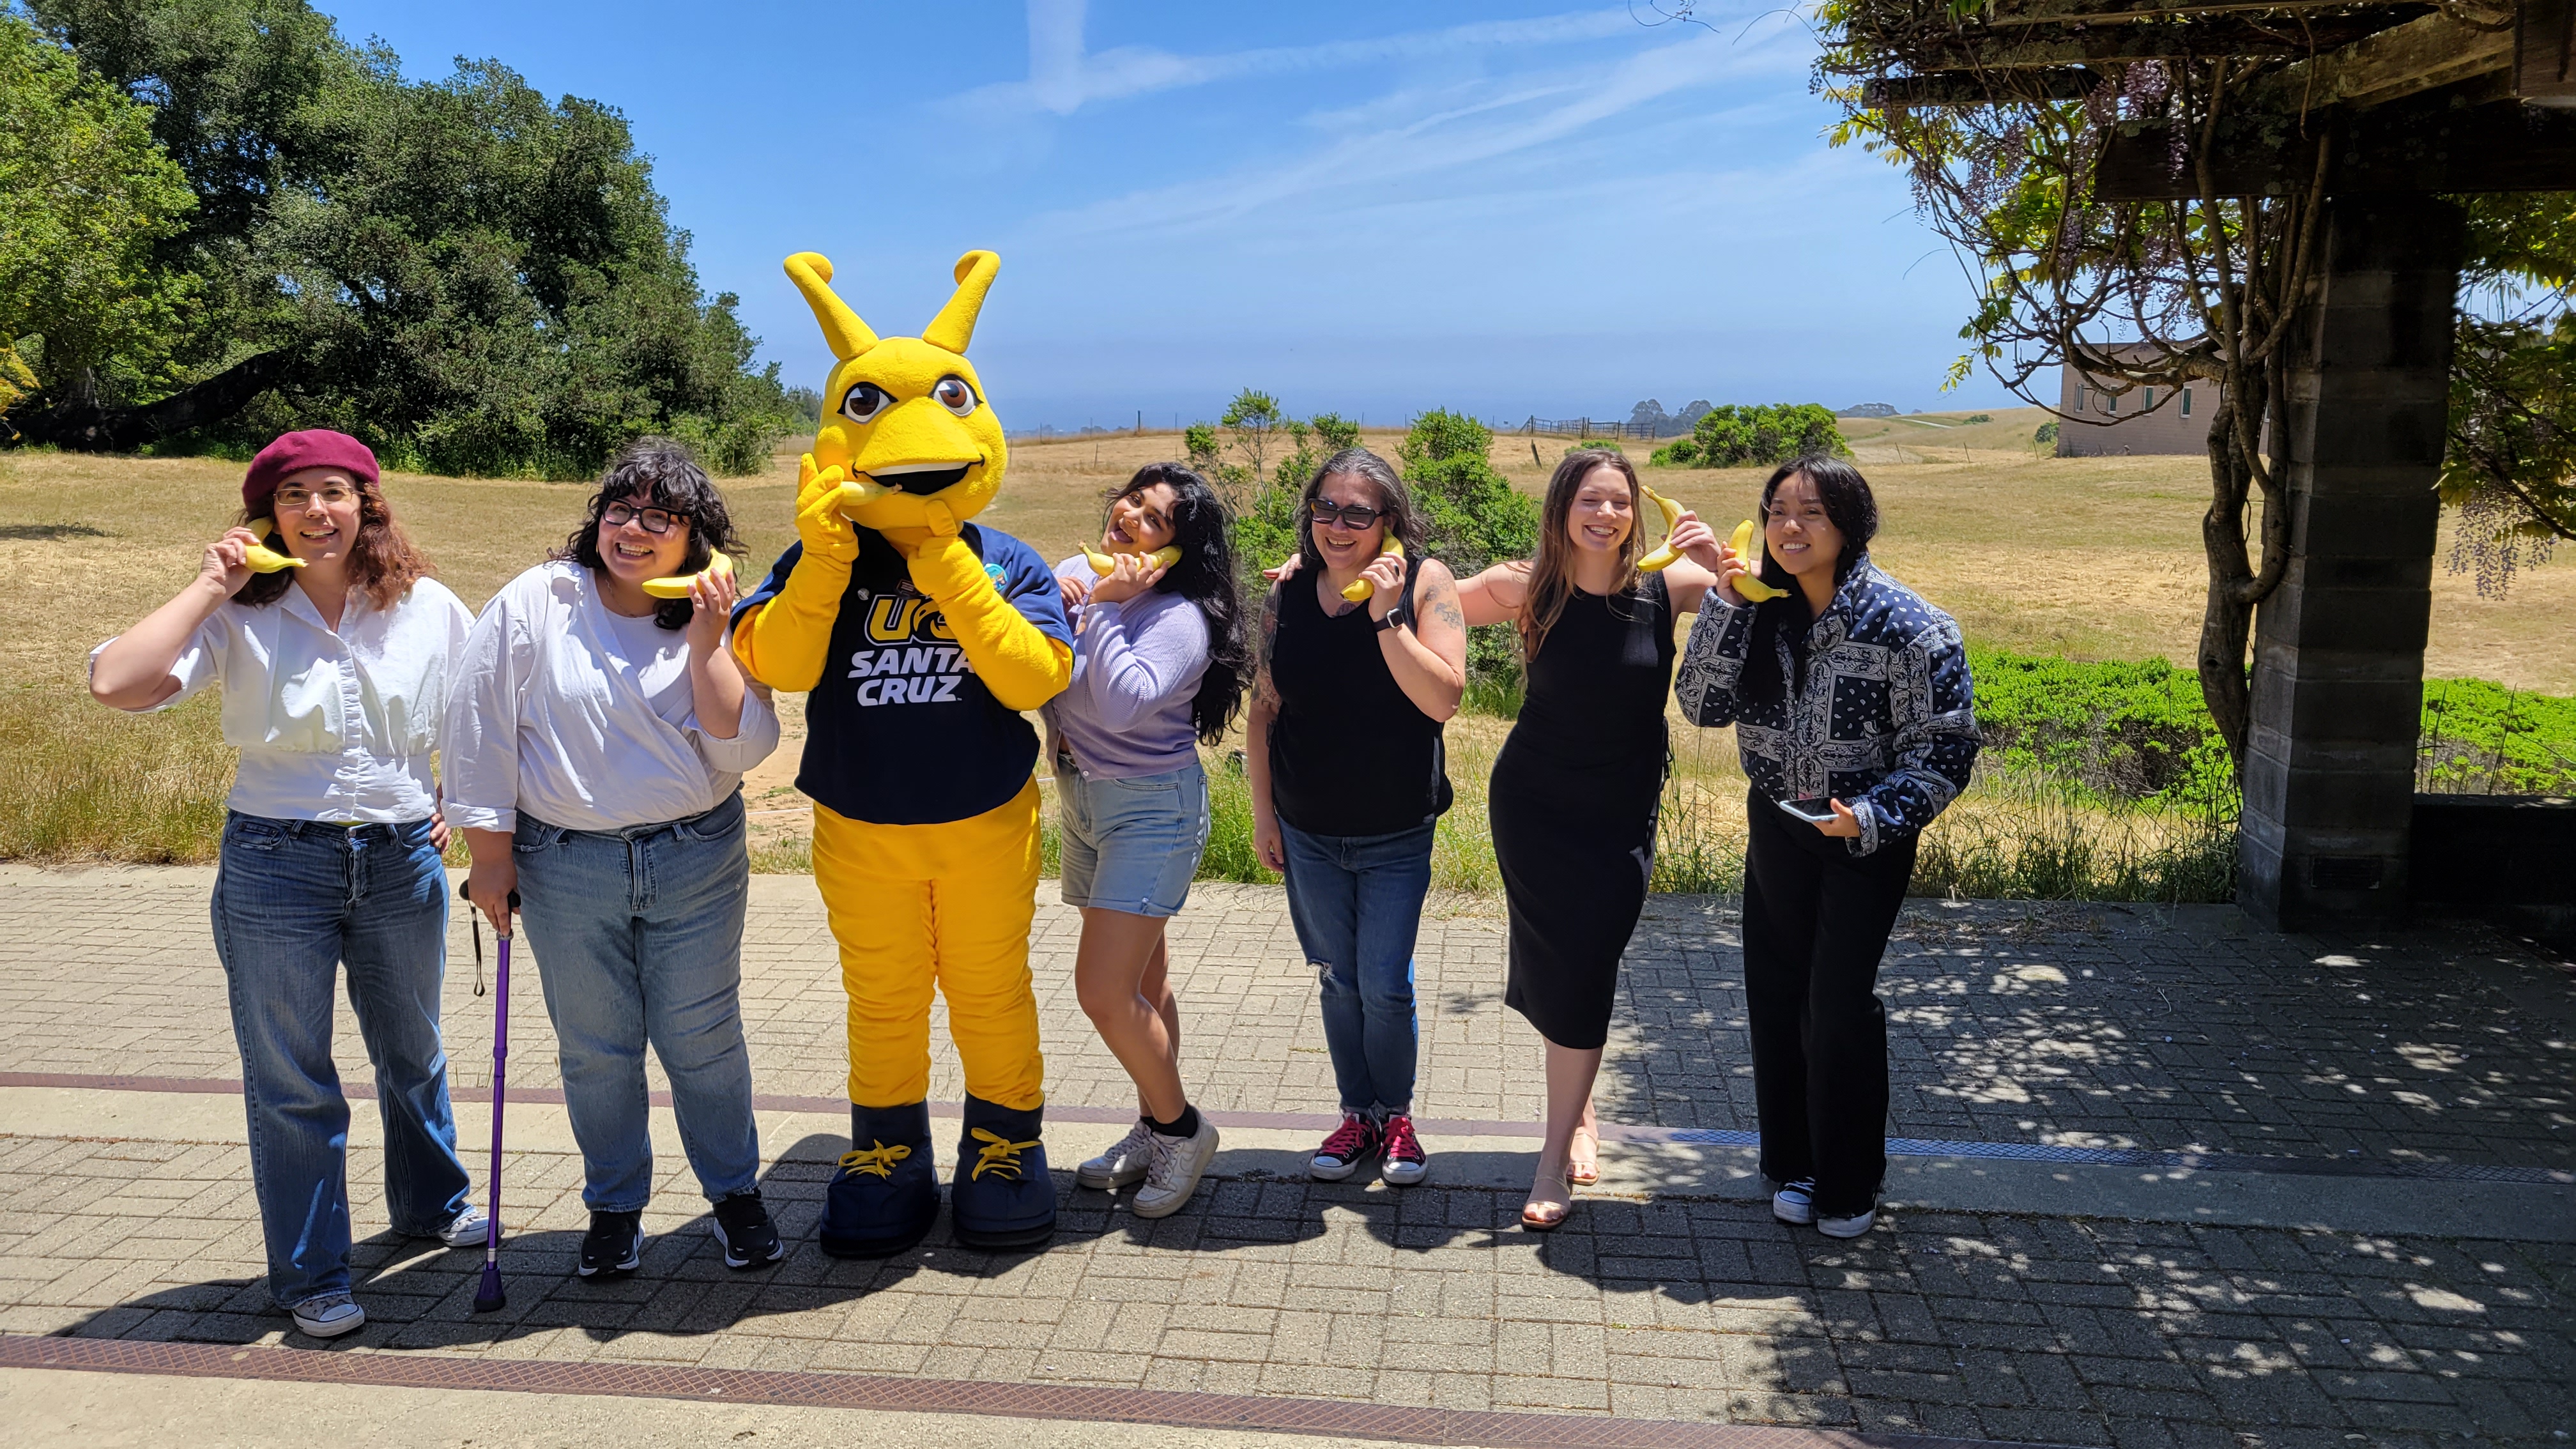 LSS team with Sammy the Slug at outdoor end-of-year tutor celebration.